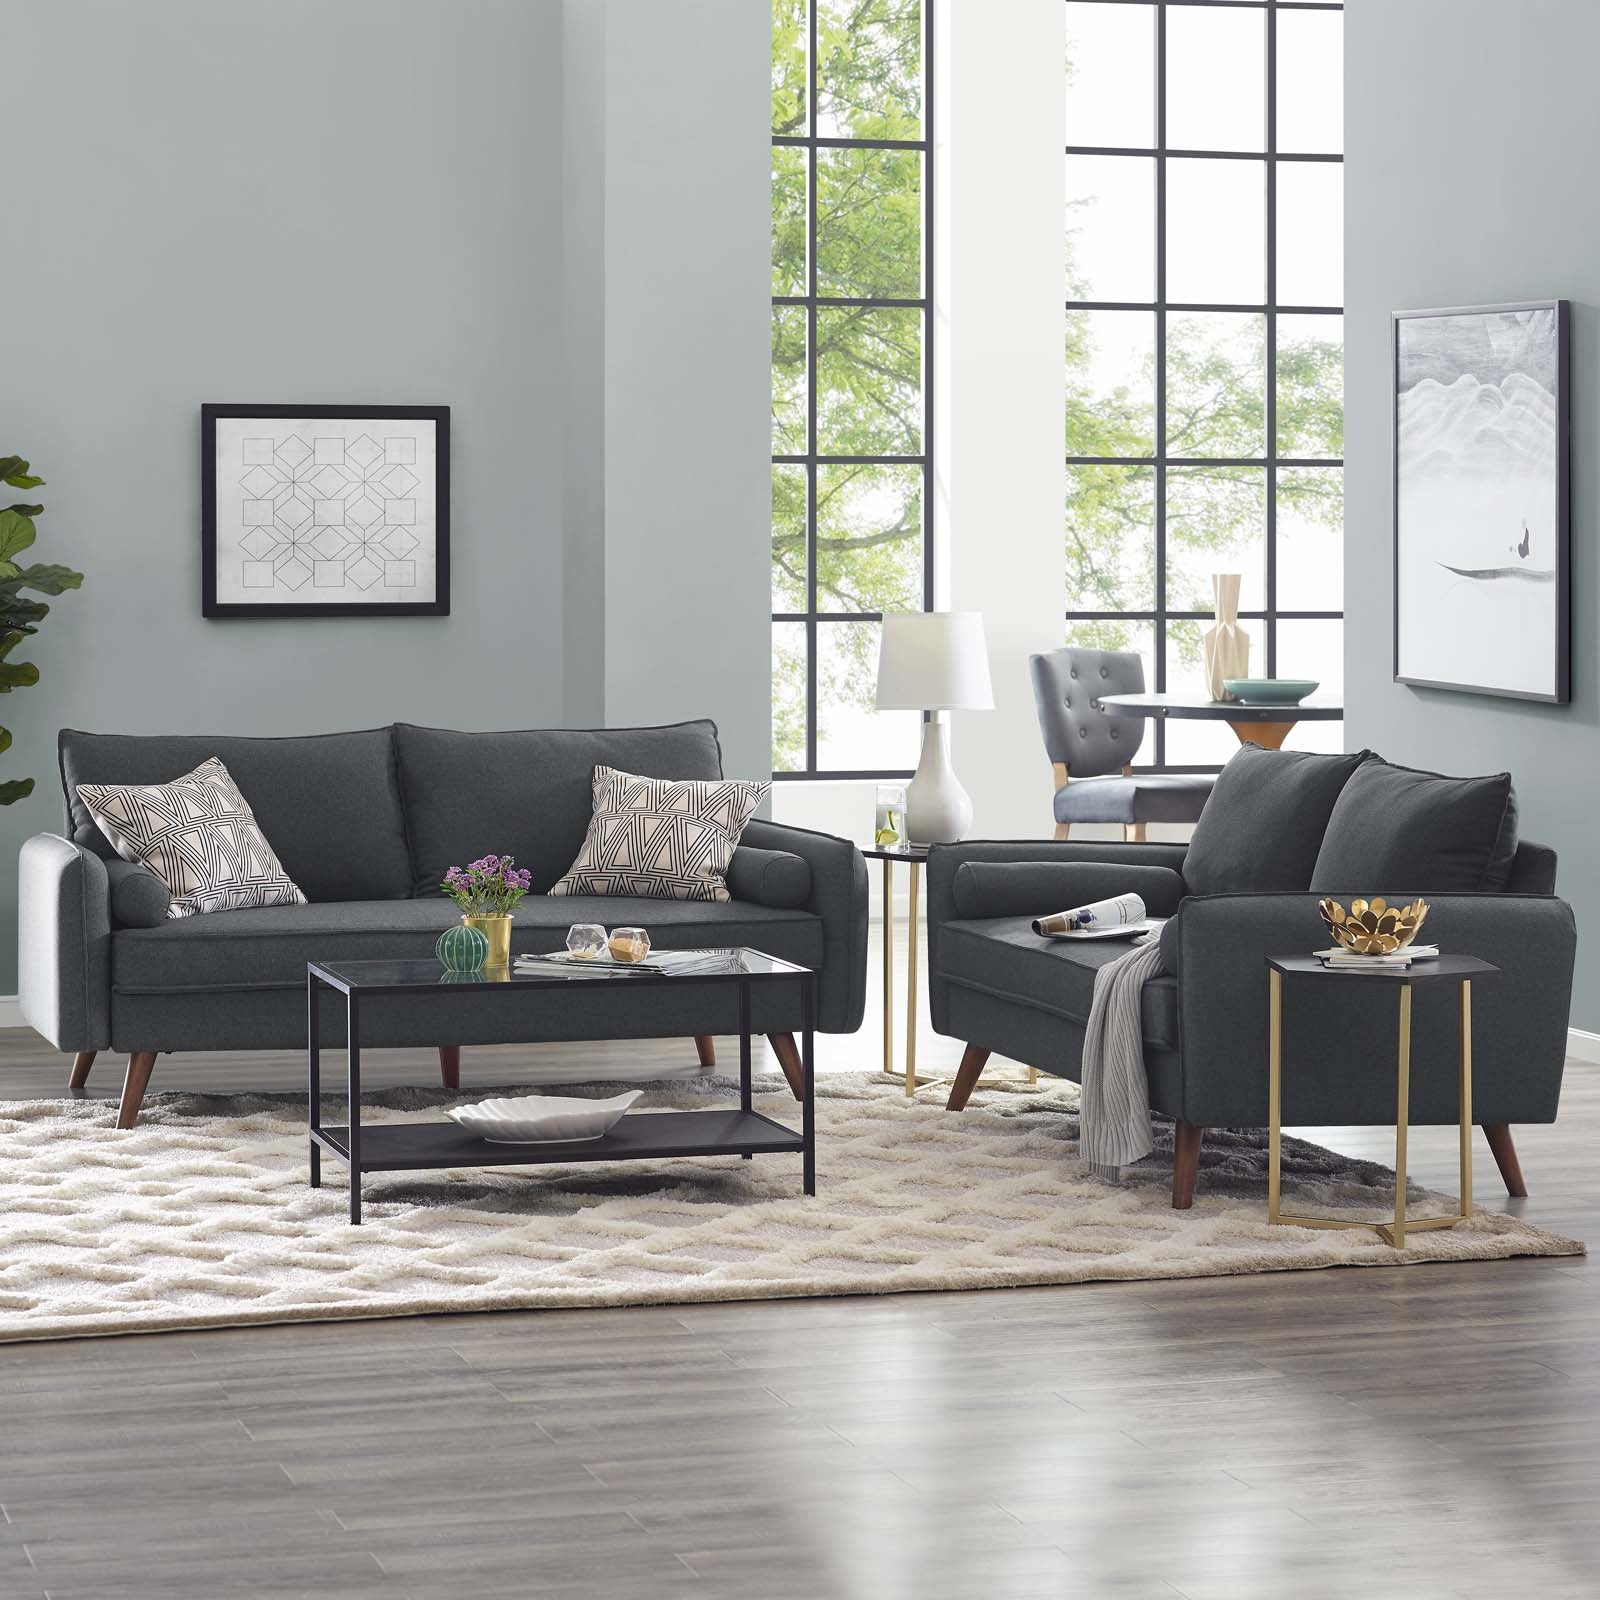 Modway Living Room Sets - Revive Upholstered Fabric Sofa and Loveseat Set Gray